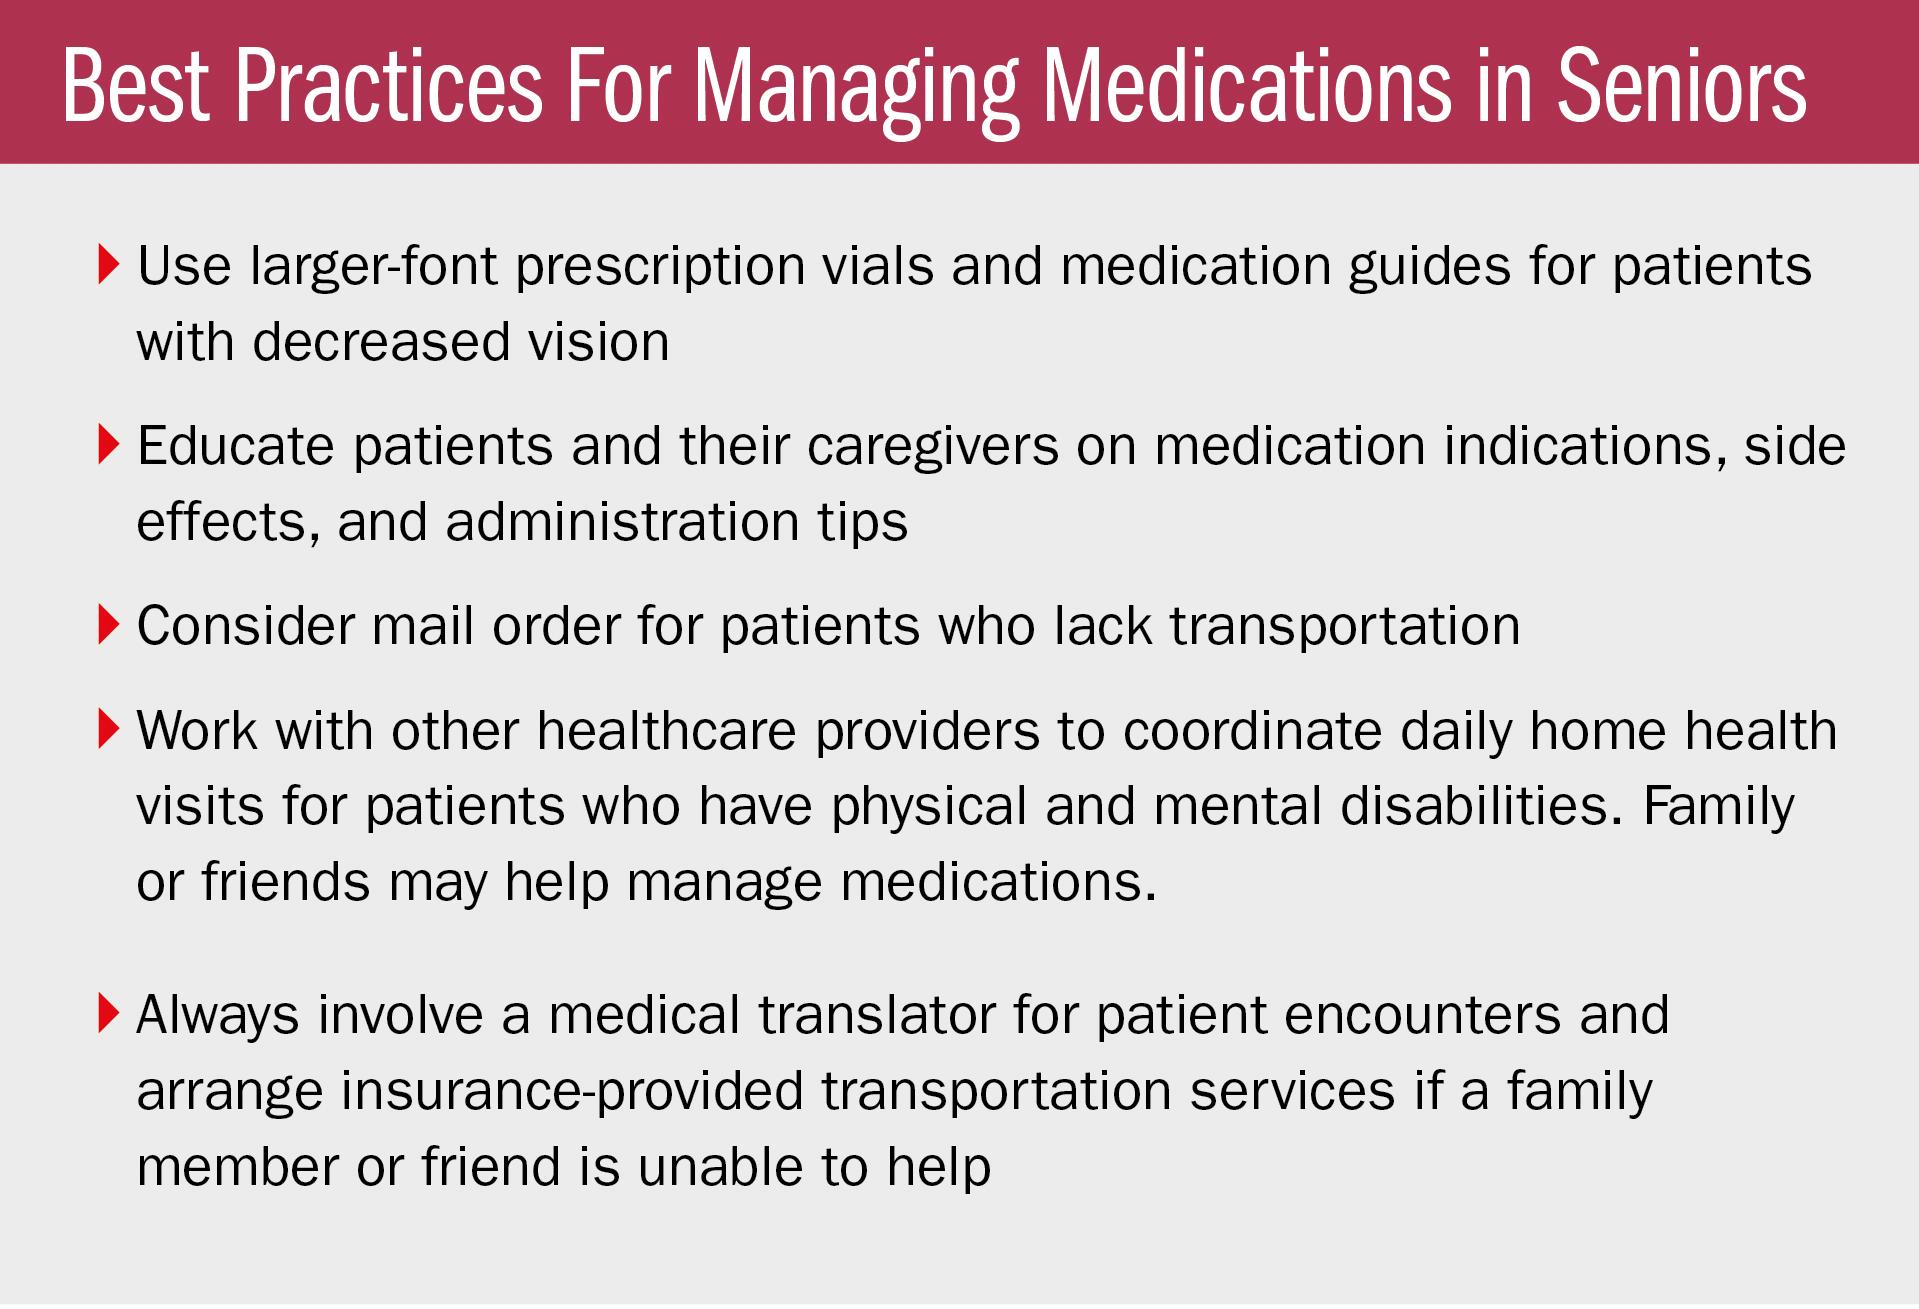 Best Practices for Managing Medications in Seniors